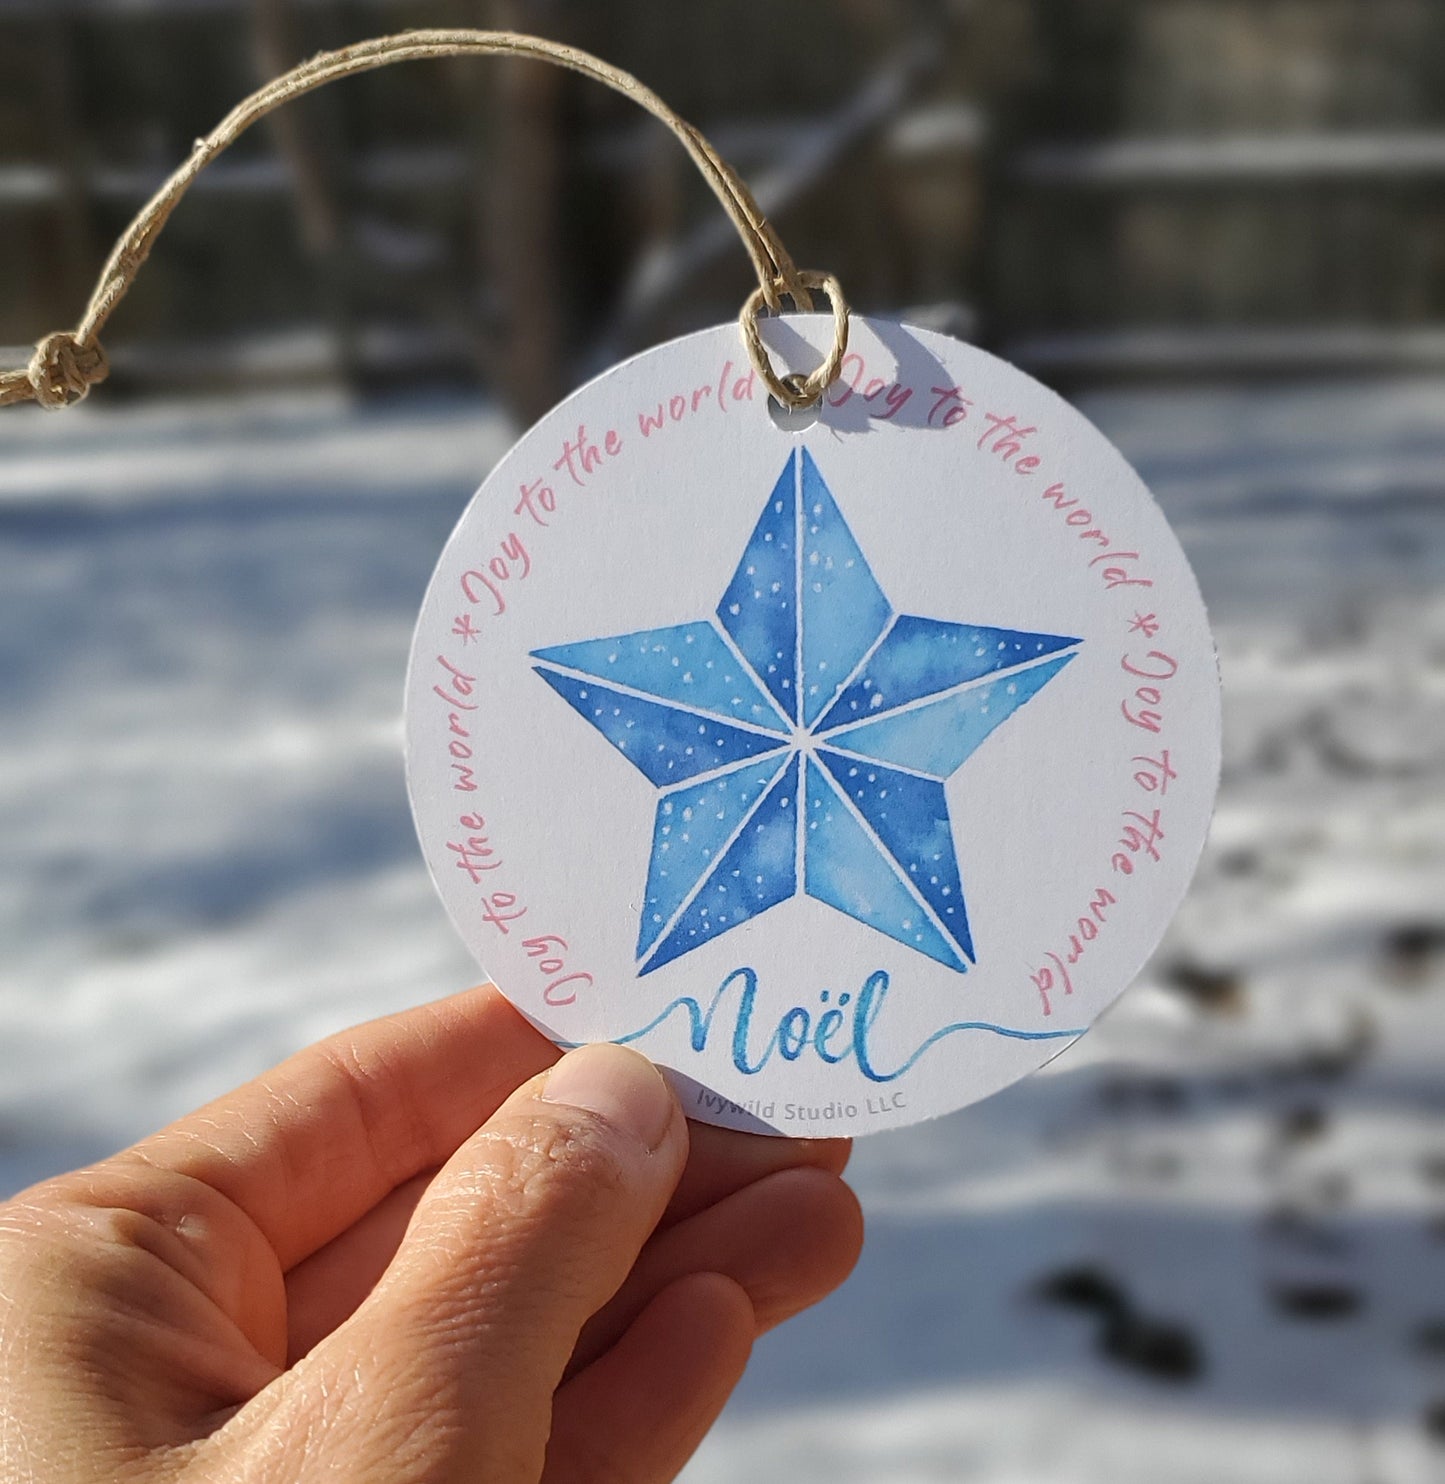 Watercolor Christmas Star Cards and Paper Ornaments - Blue